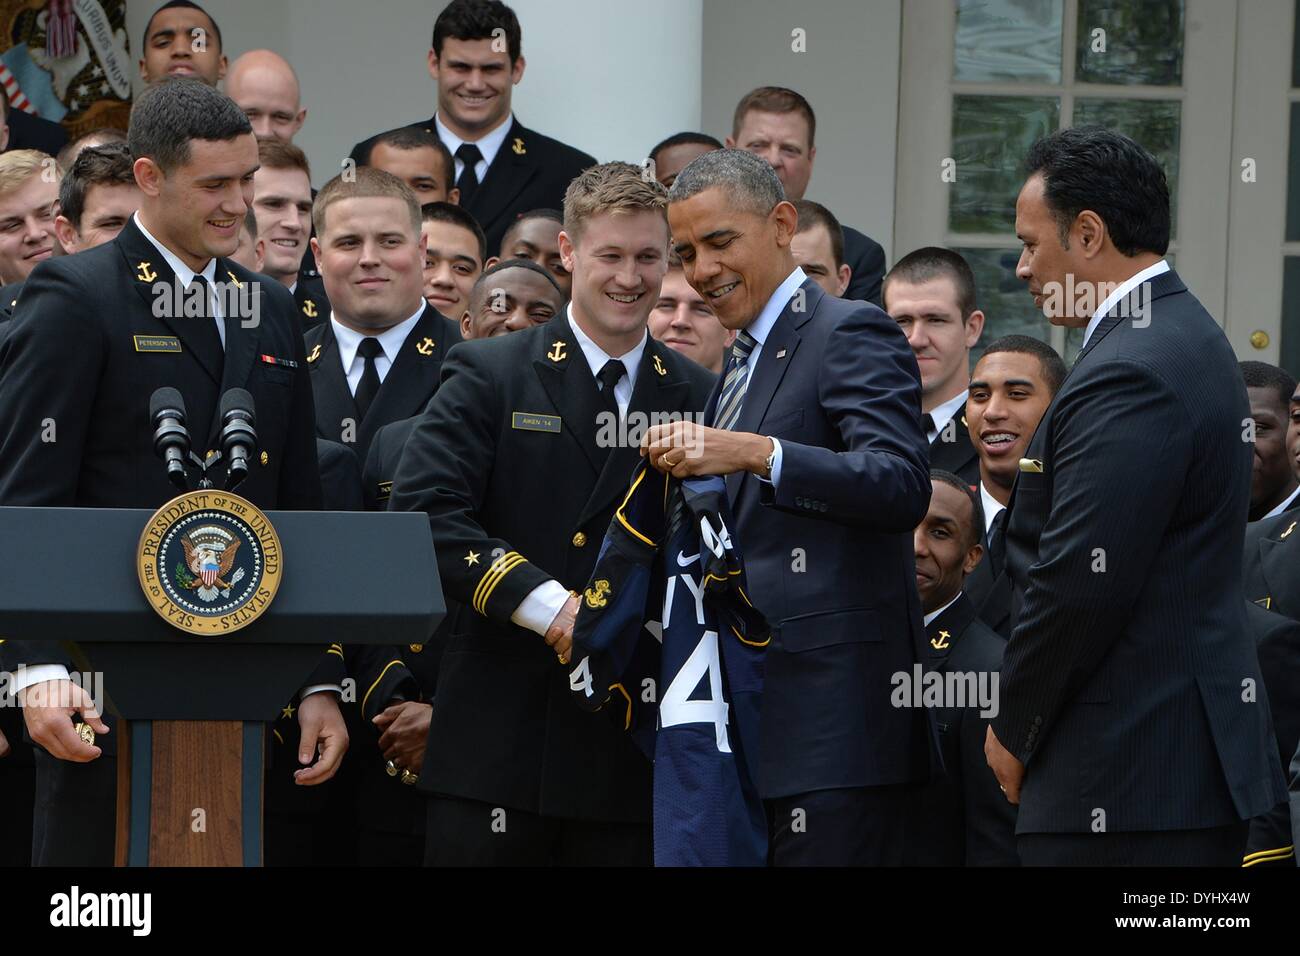 US President Barack Obama thanks US Naval Academy football team member Matt Aiken after being presented with a customized naval academy football jersey during an event on the South Lawn of the White House April 18, 2014 in Washington, D.C. The president presented the Navy Midshipmen with the Commander-in-Chief's Trophy, which goes to the Department of Defense academy team with the most victories against its Service rivals. Stock Photo